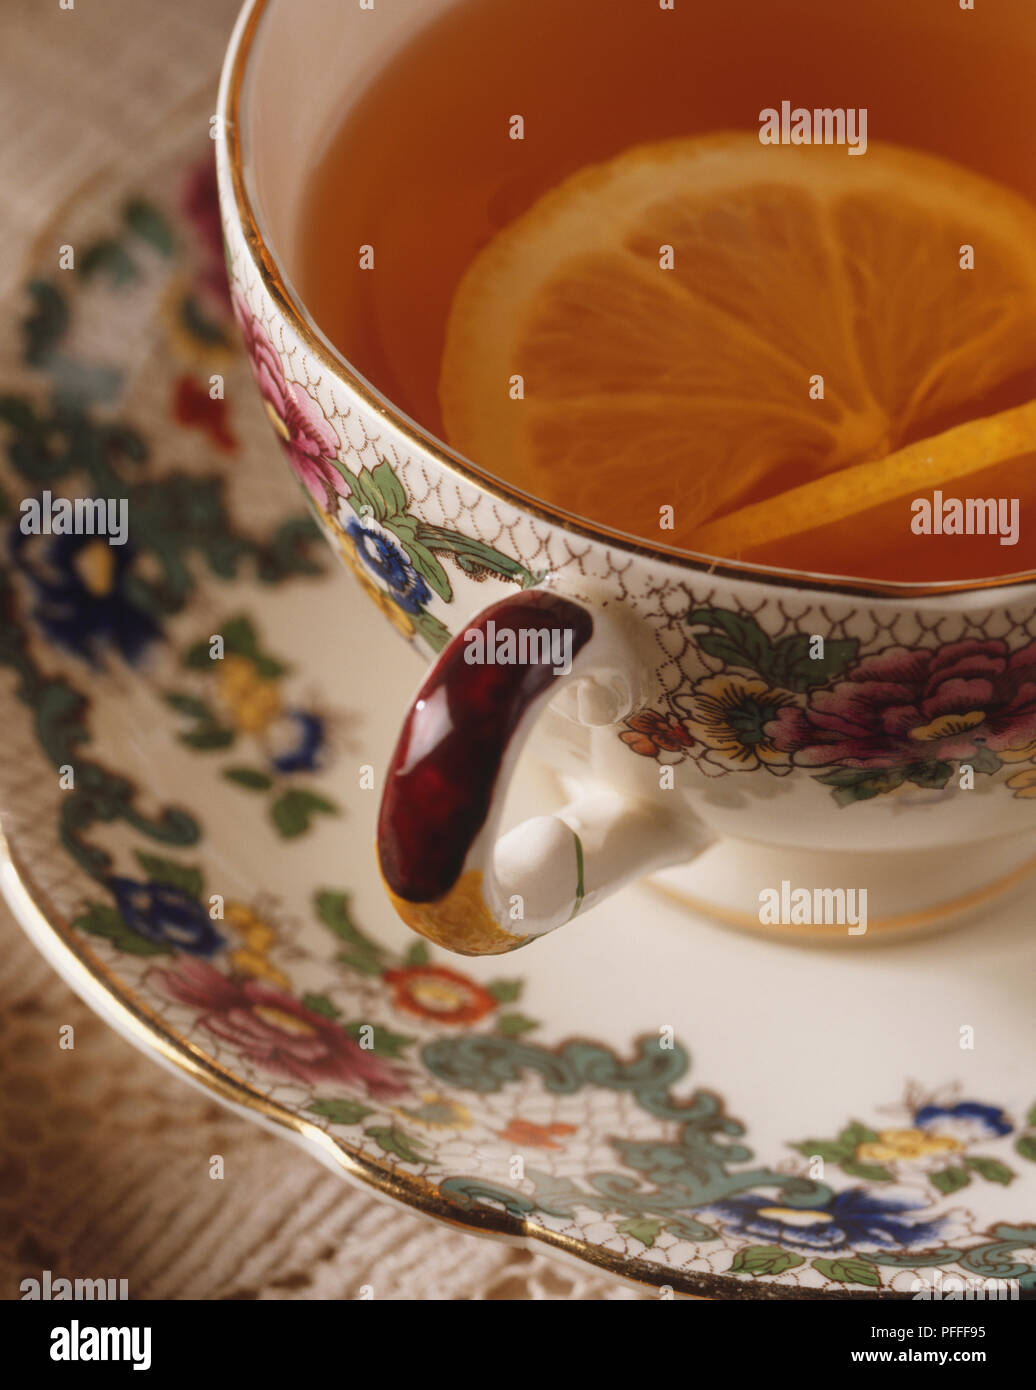 Tea served in a flower pattern china cup, garnished with a slice of lemon, close up, high angle view Stock Photo